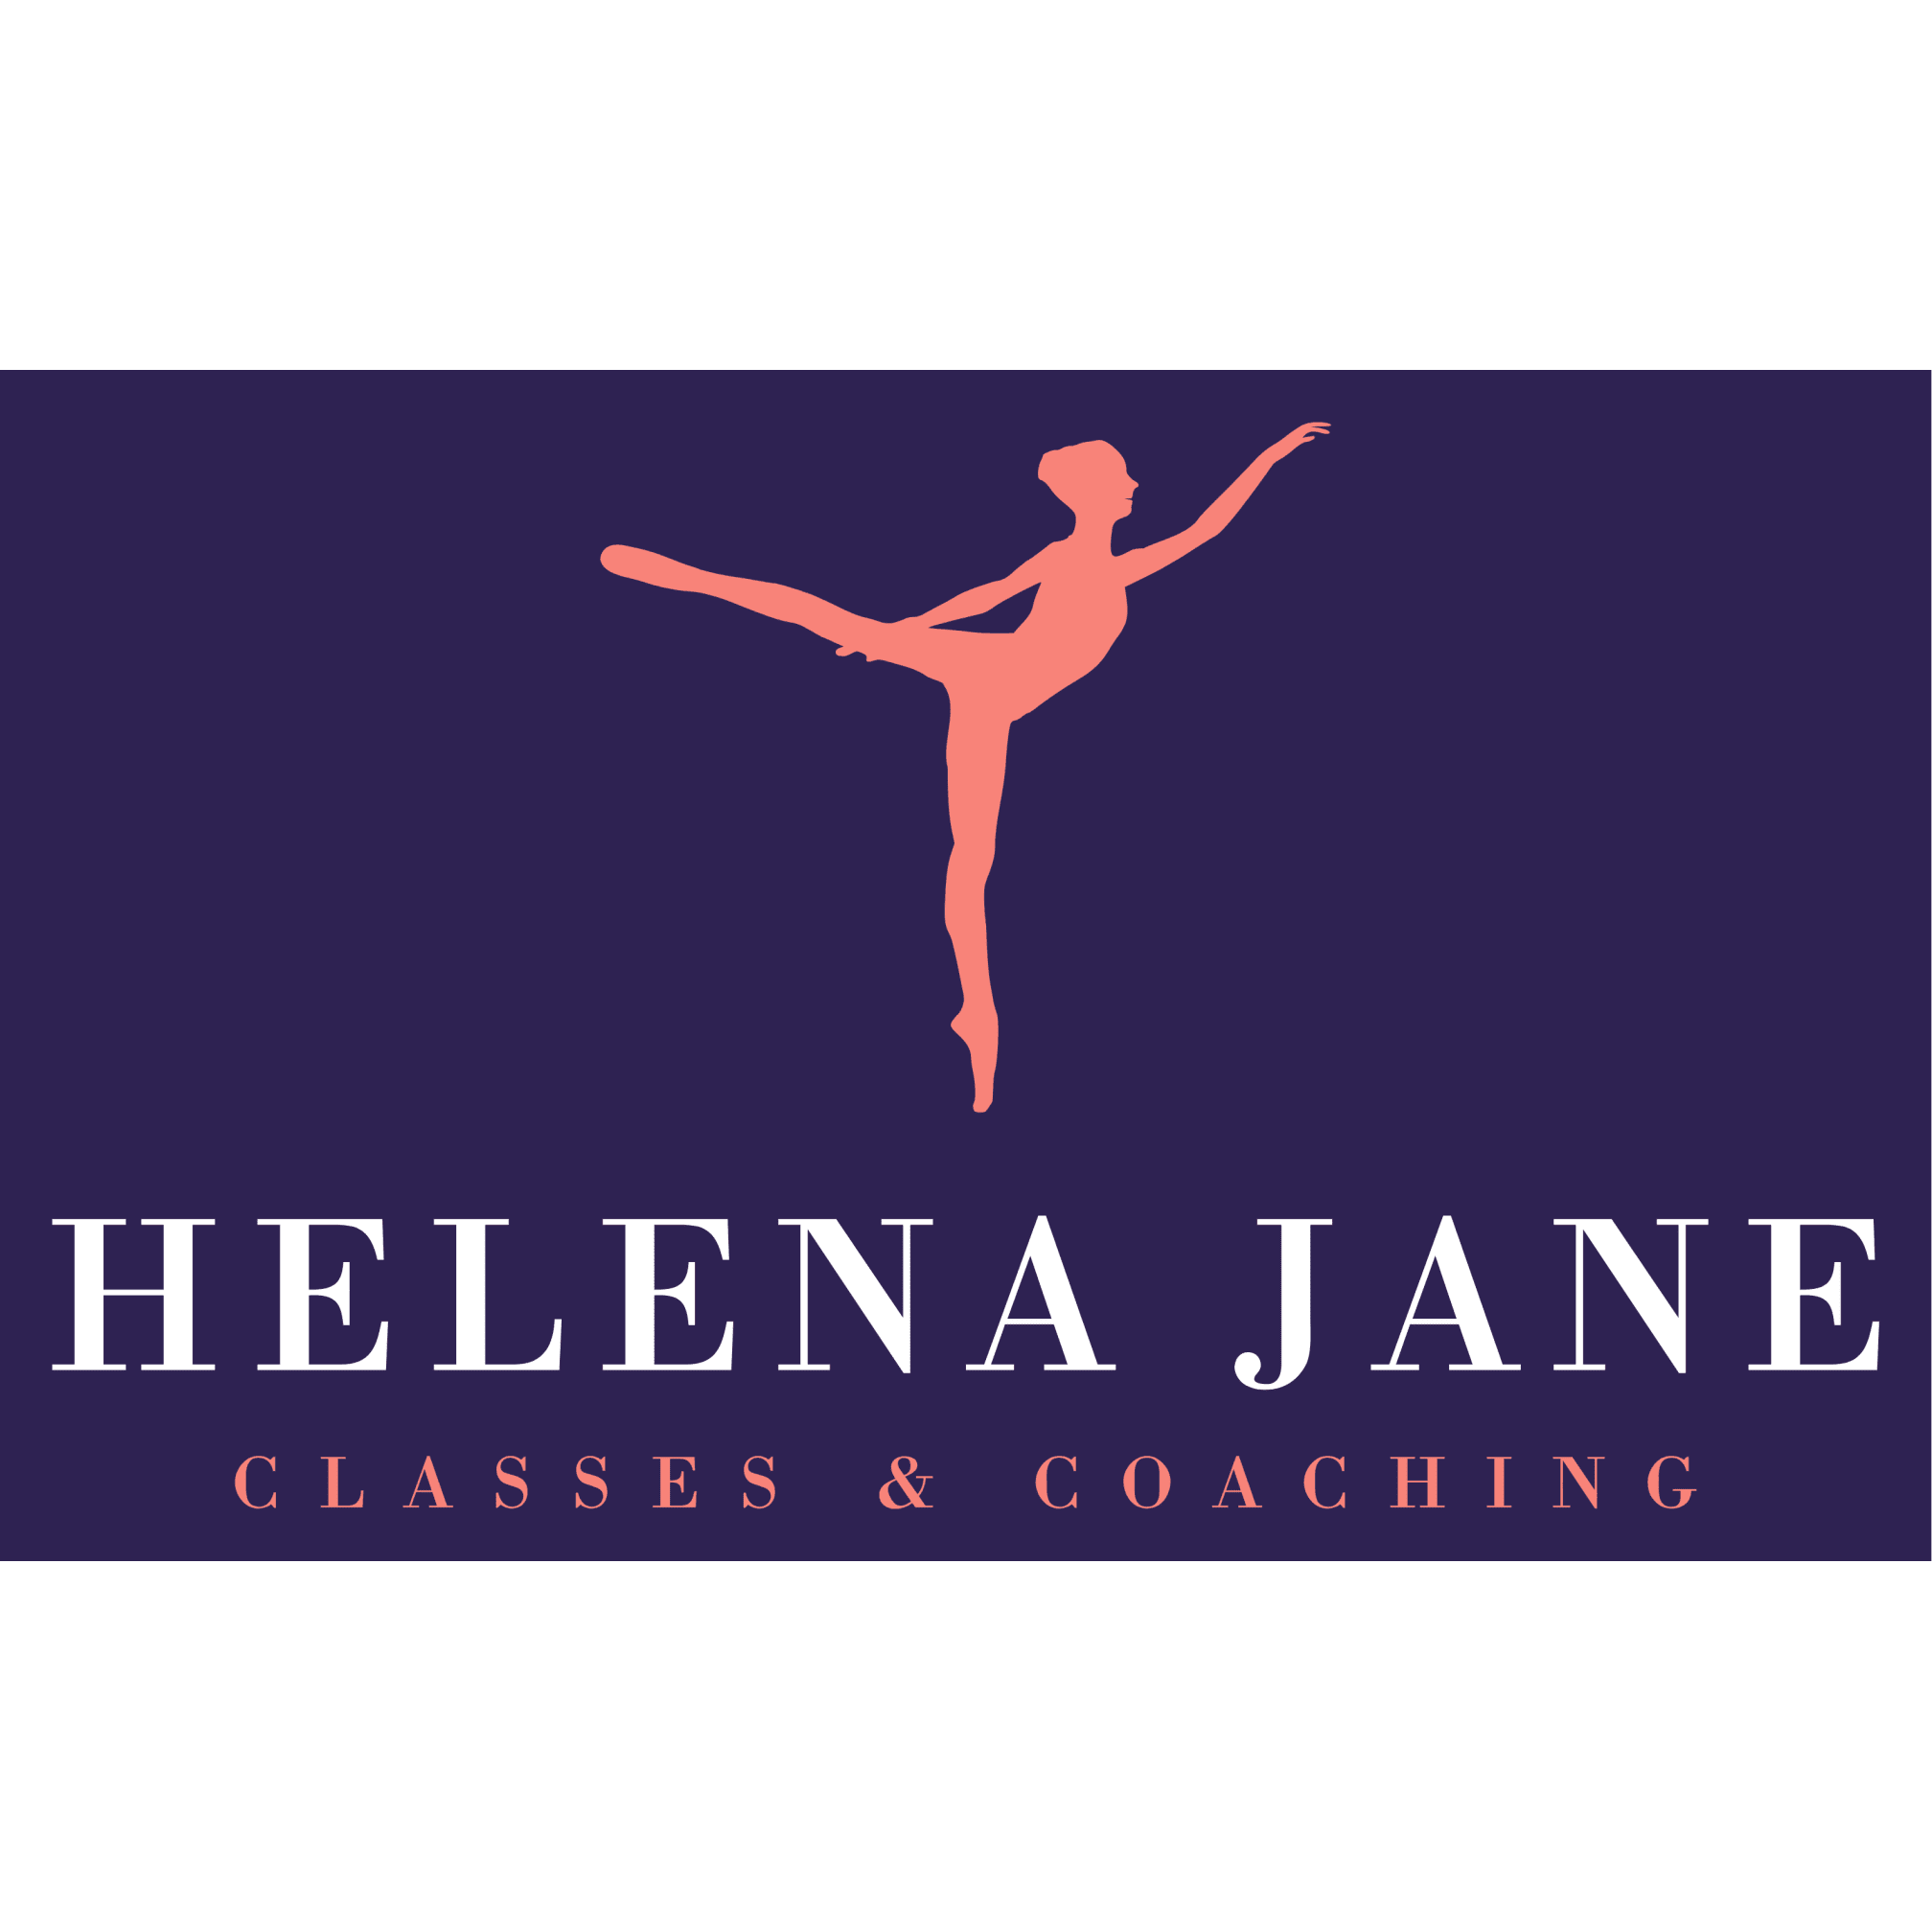 Helena Jane Classes & Coaching - Redditch, Worcestershire - 07572 042164 | ShowMeLocal.com